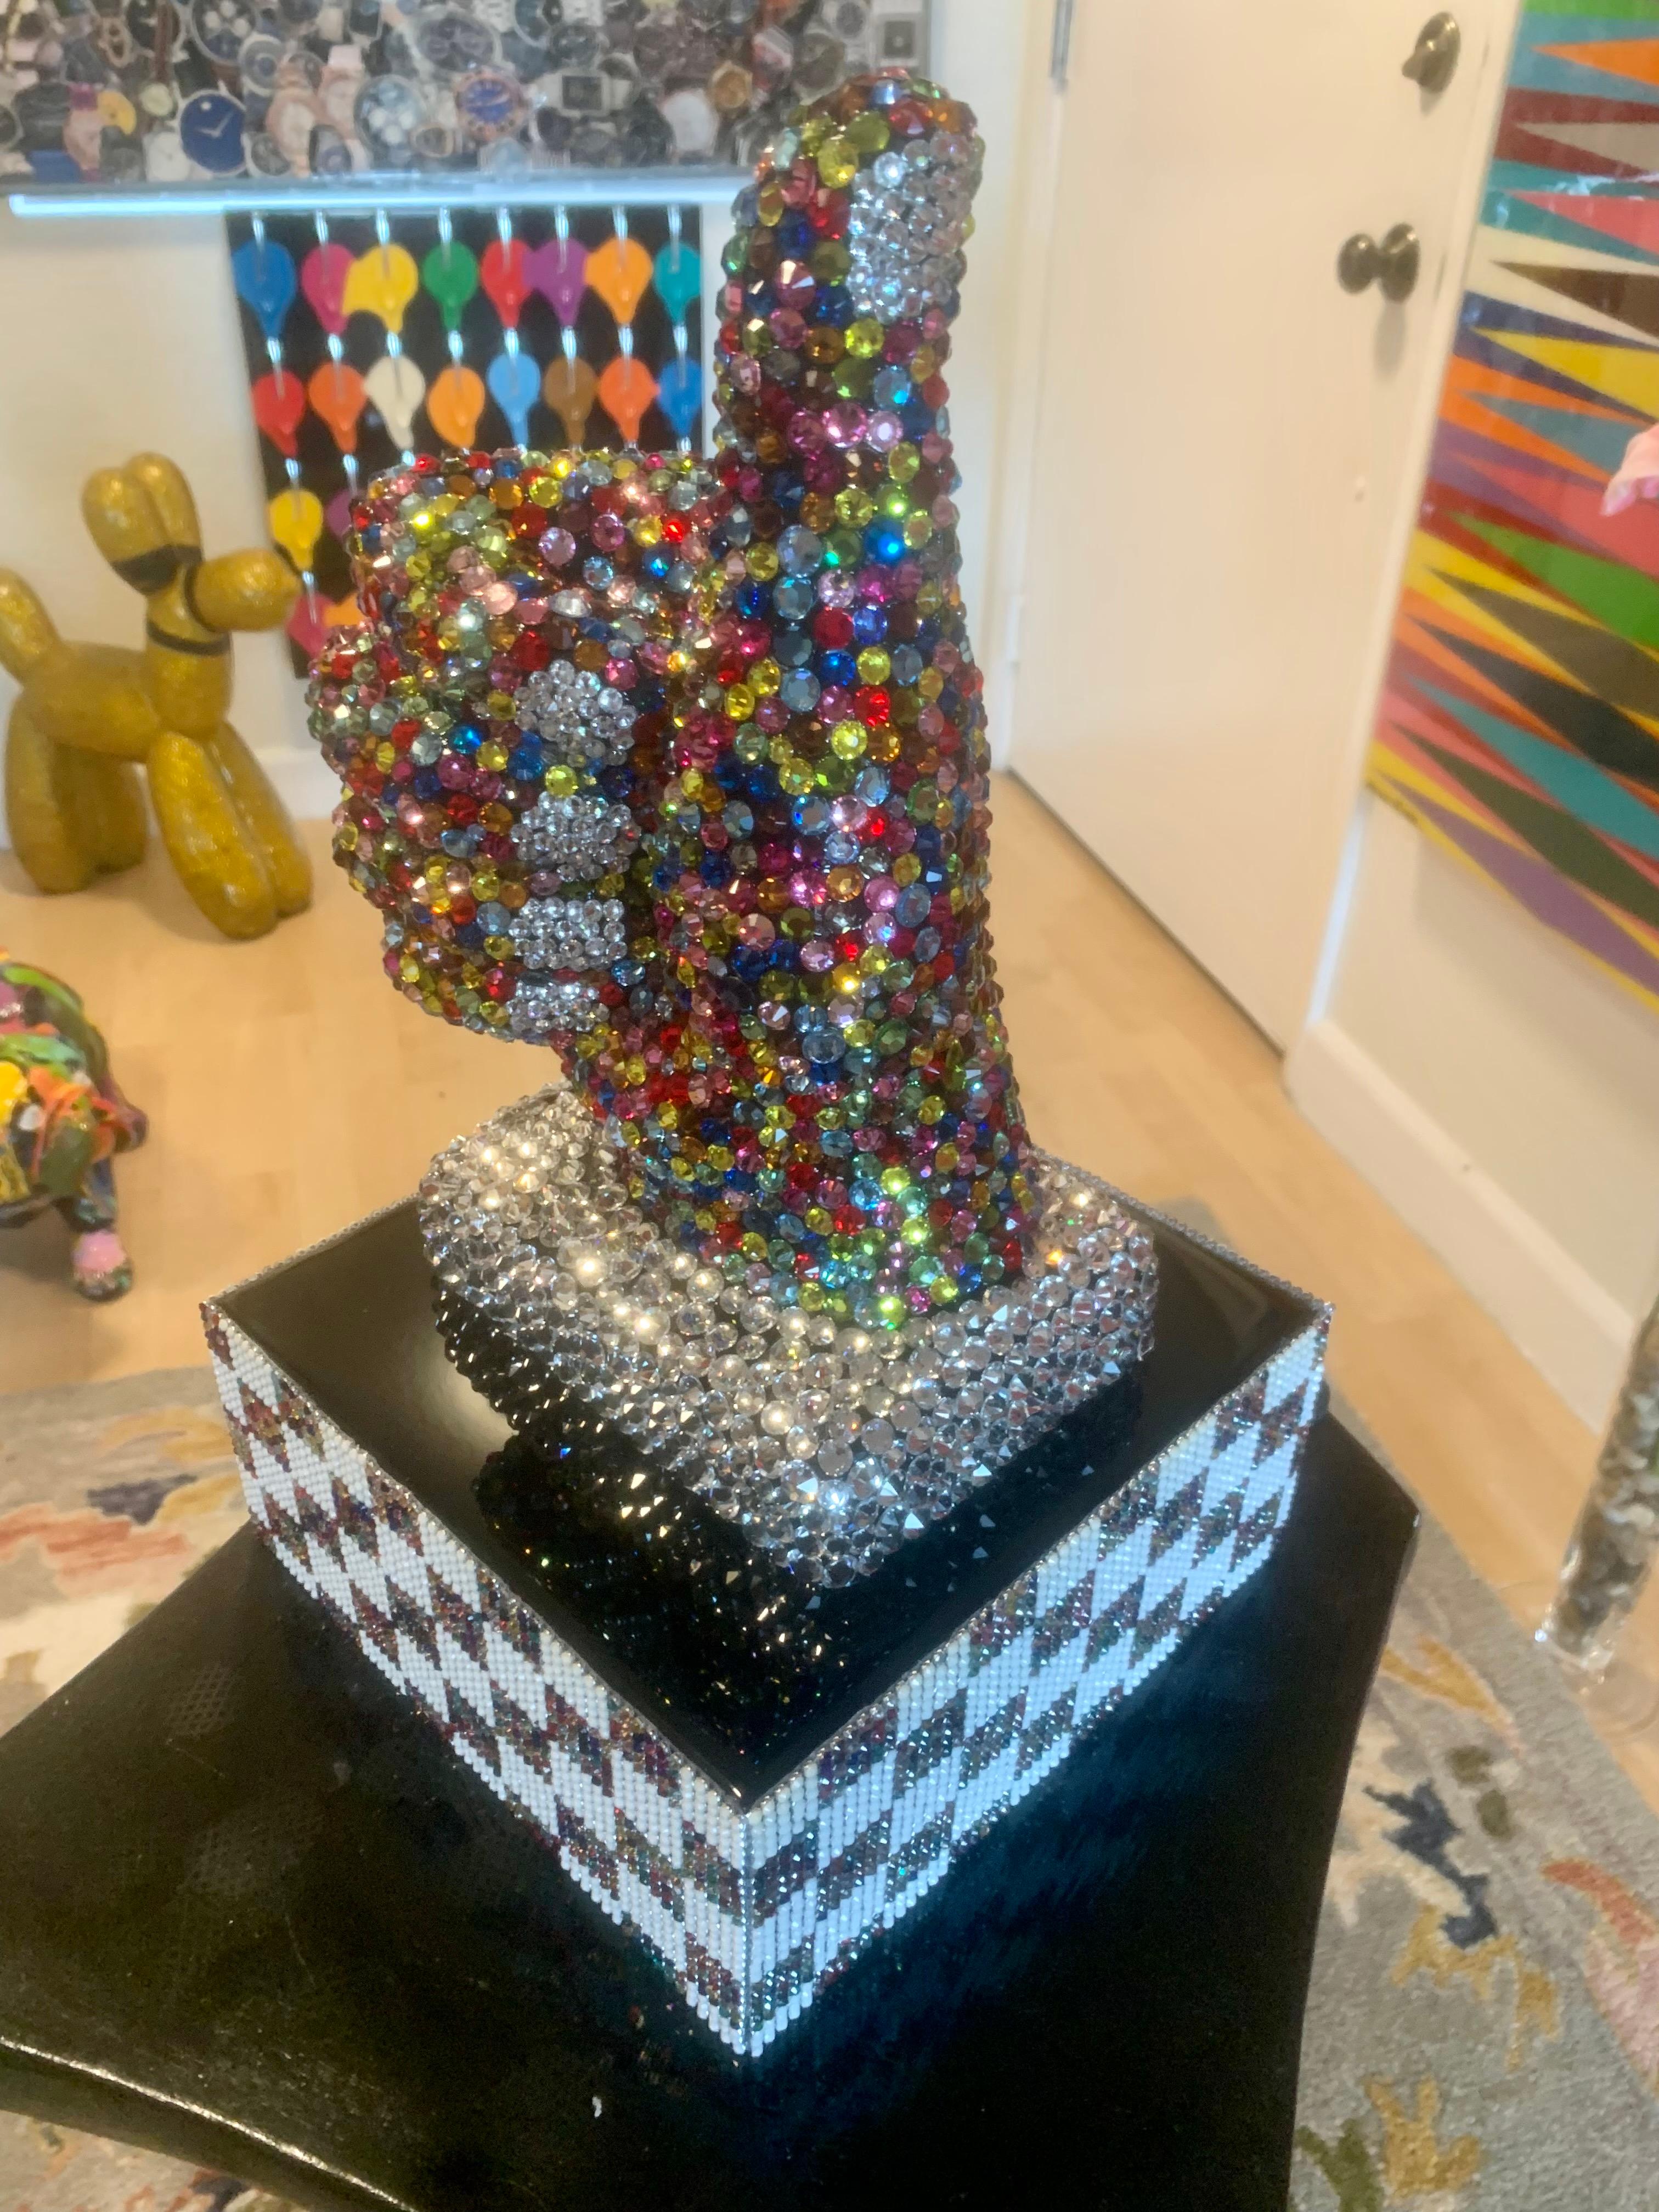 THUMBS UP FOR LIFE (One of a Kind Swarovski Mixed Media Sculpture) 1